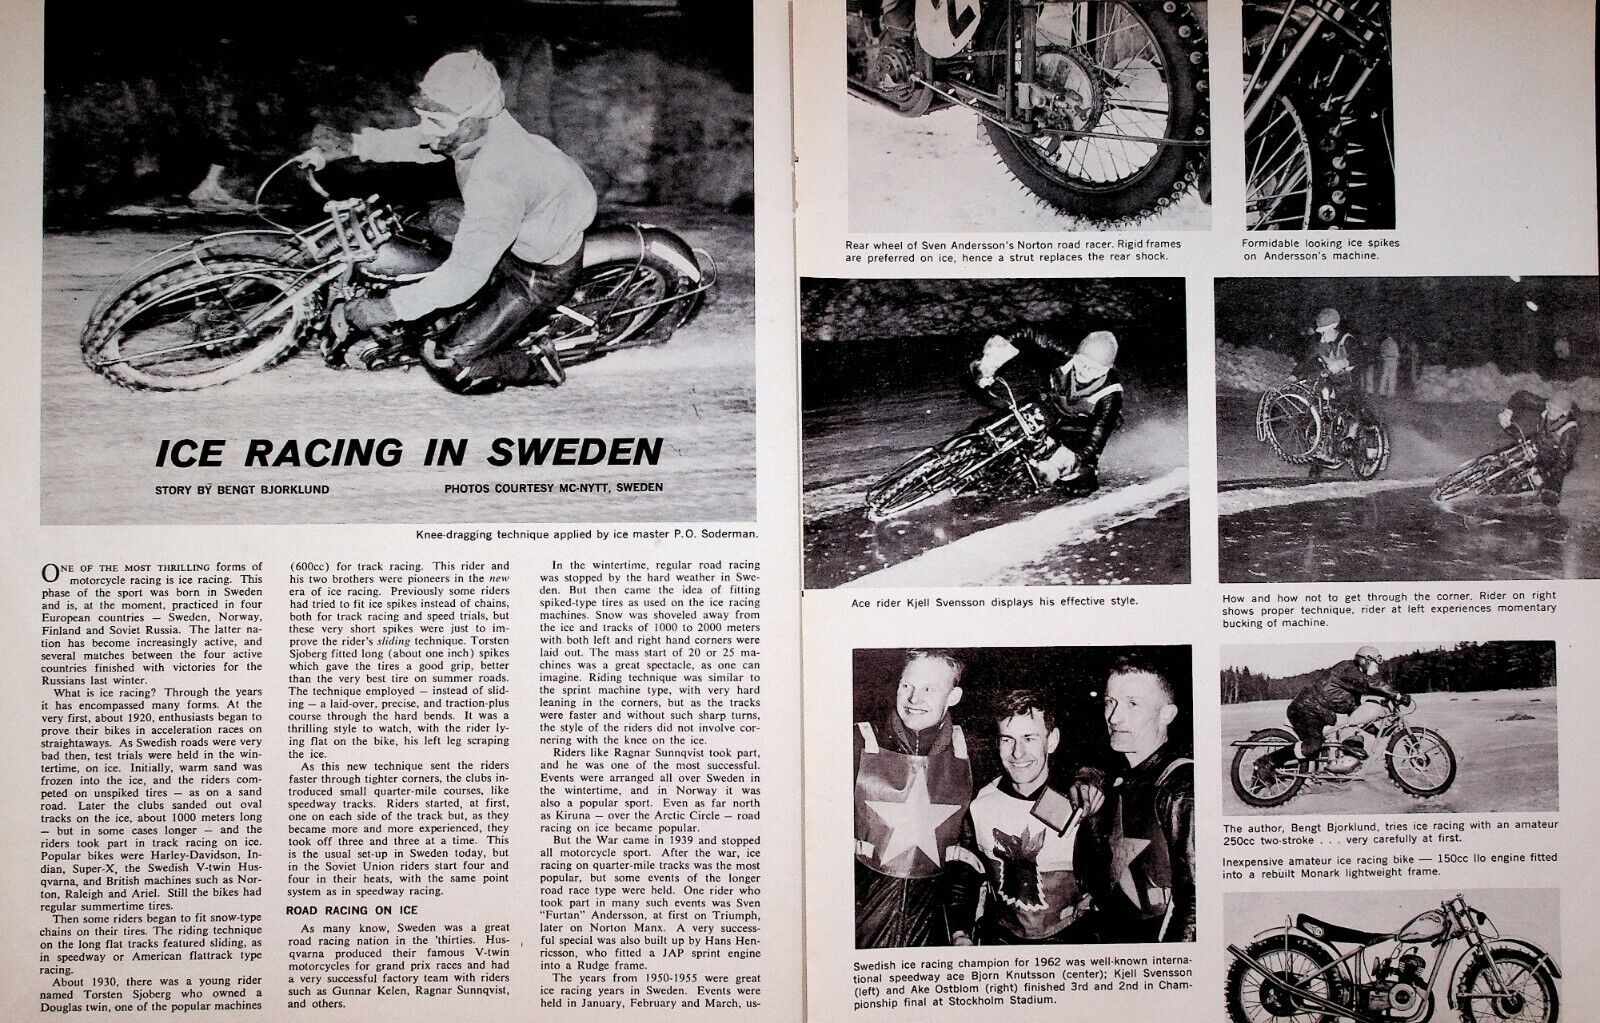 1963 Motorcycle Ice Racing In Sweden - 3-page Vintage Article